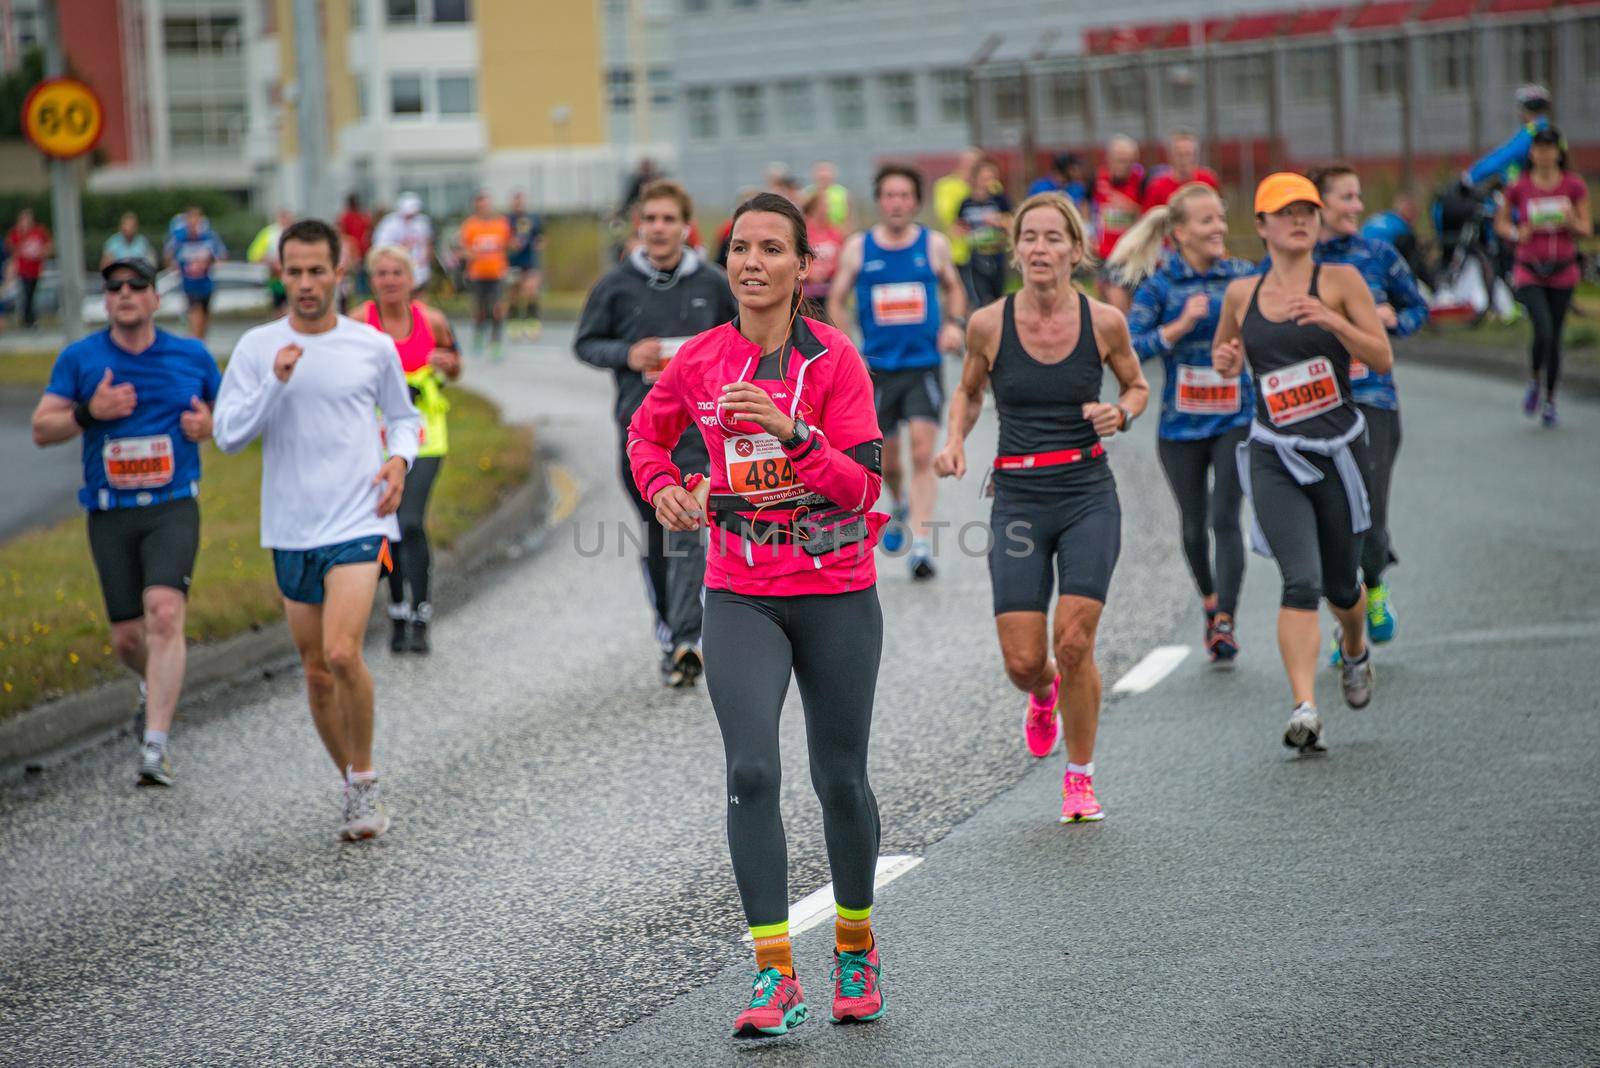 Runners at annual city marathon in Reykjavik downtown, Iceland